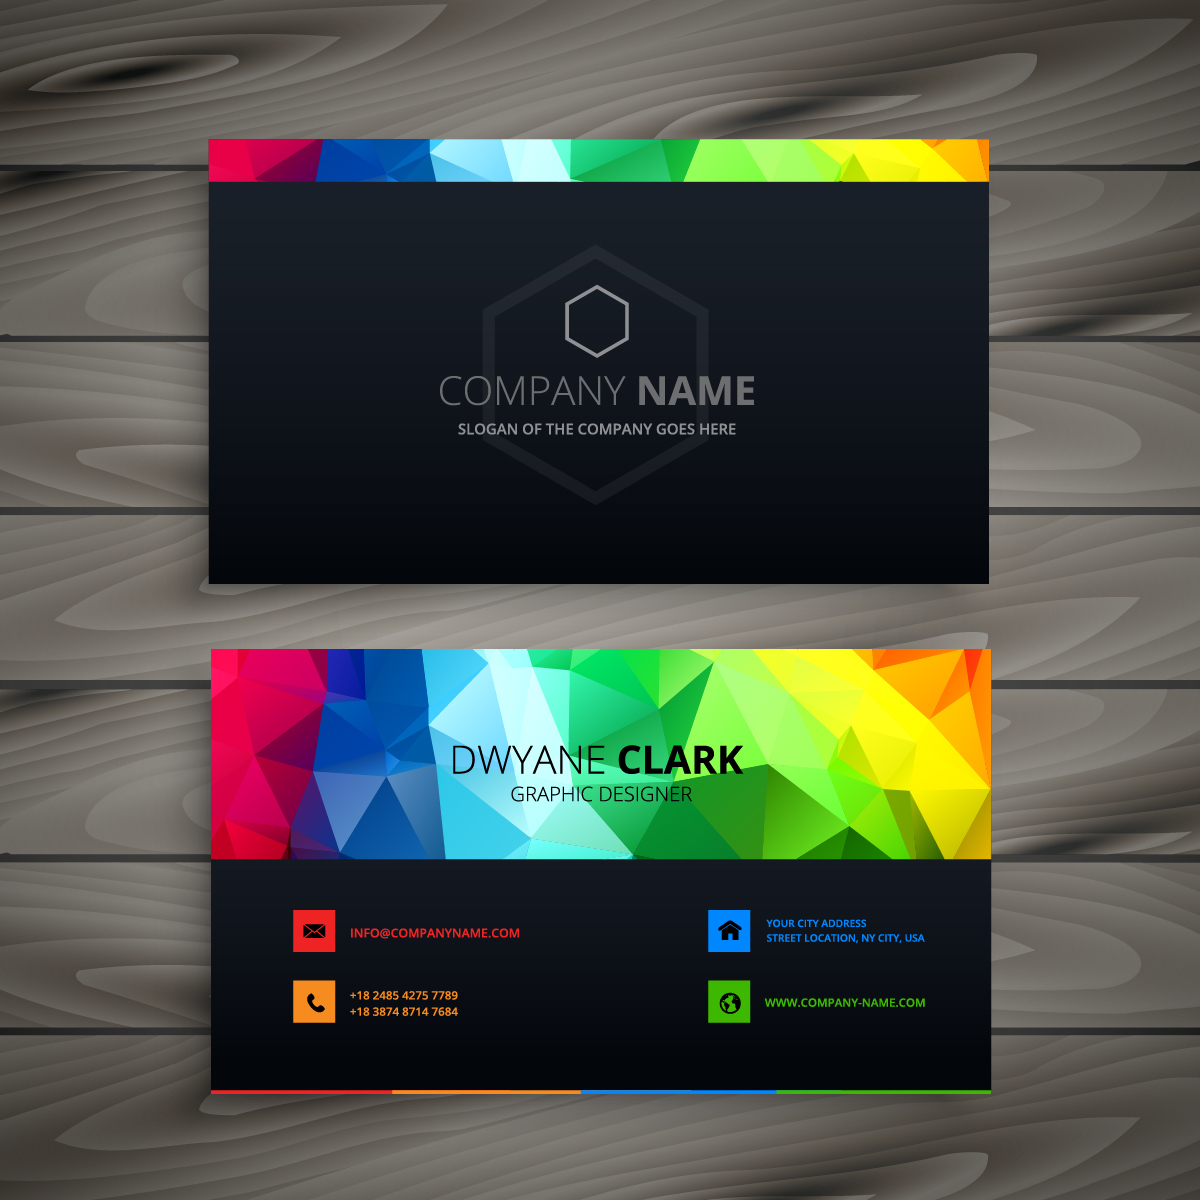 Dark business card with abstract shapes